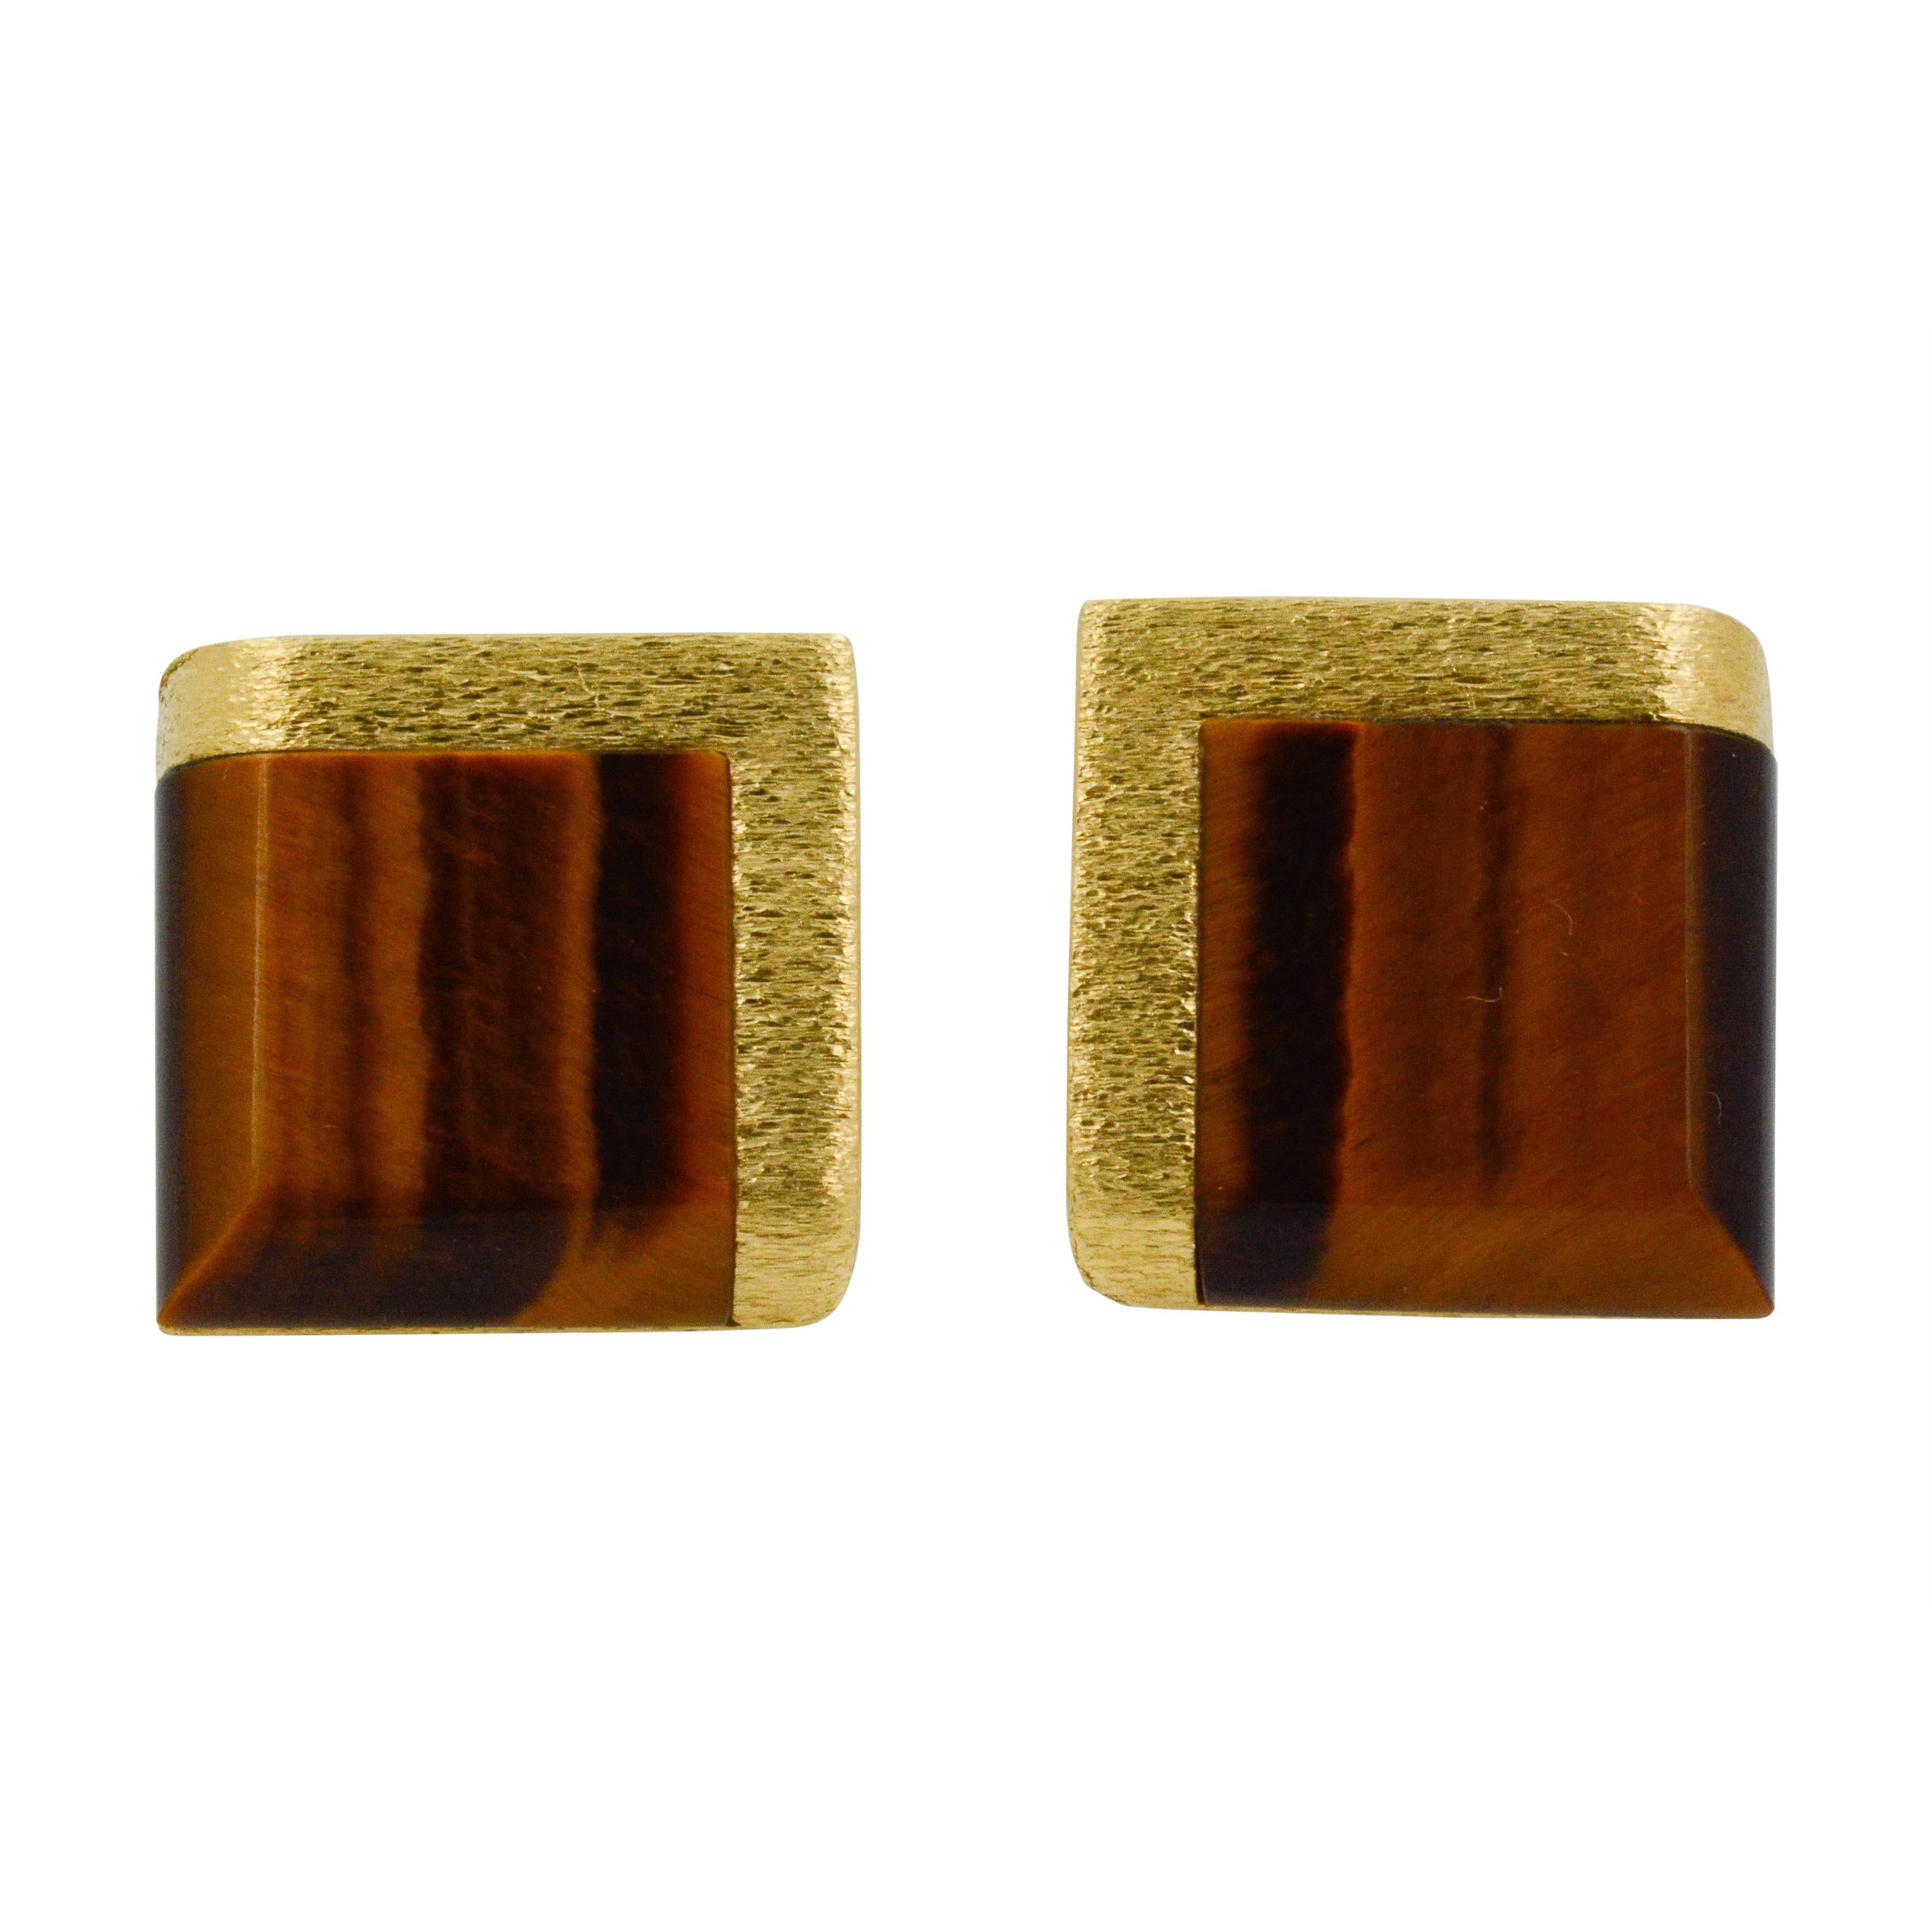 These charming square cufflinks are adorned with tigers eye and a matte 18k yellow gold bored on two sides. The rest of the cufflinks are in 18k yellow gold, creating a classic look perfectly paired for any look. 